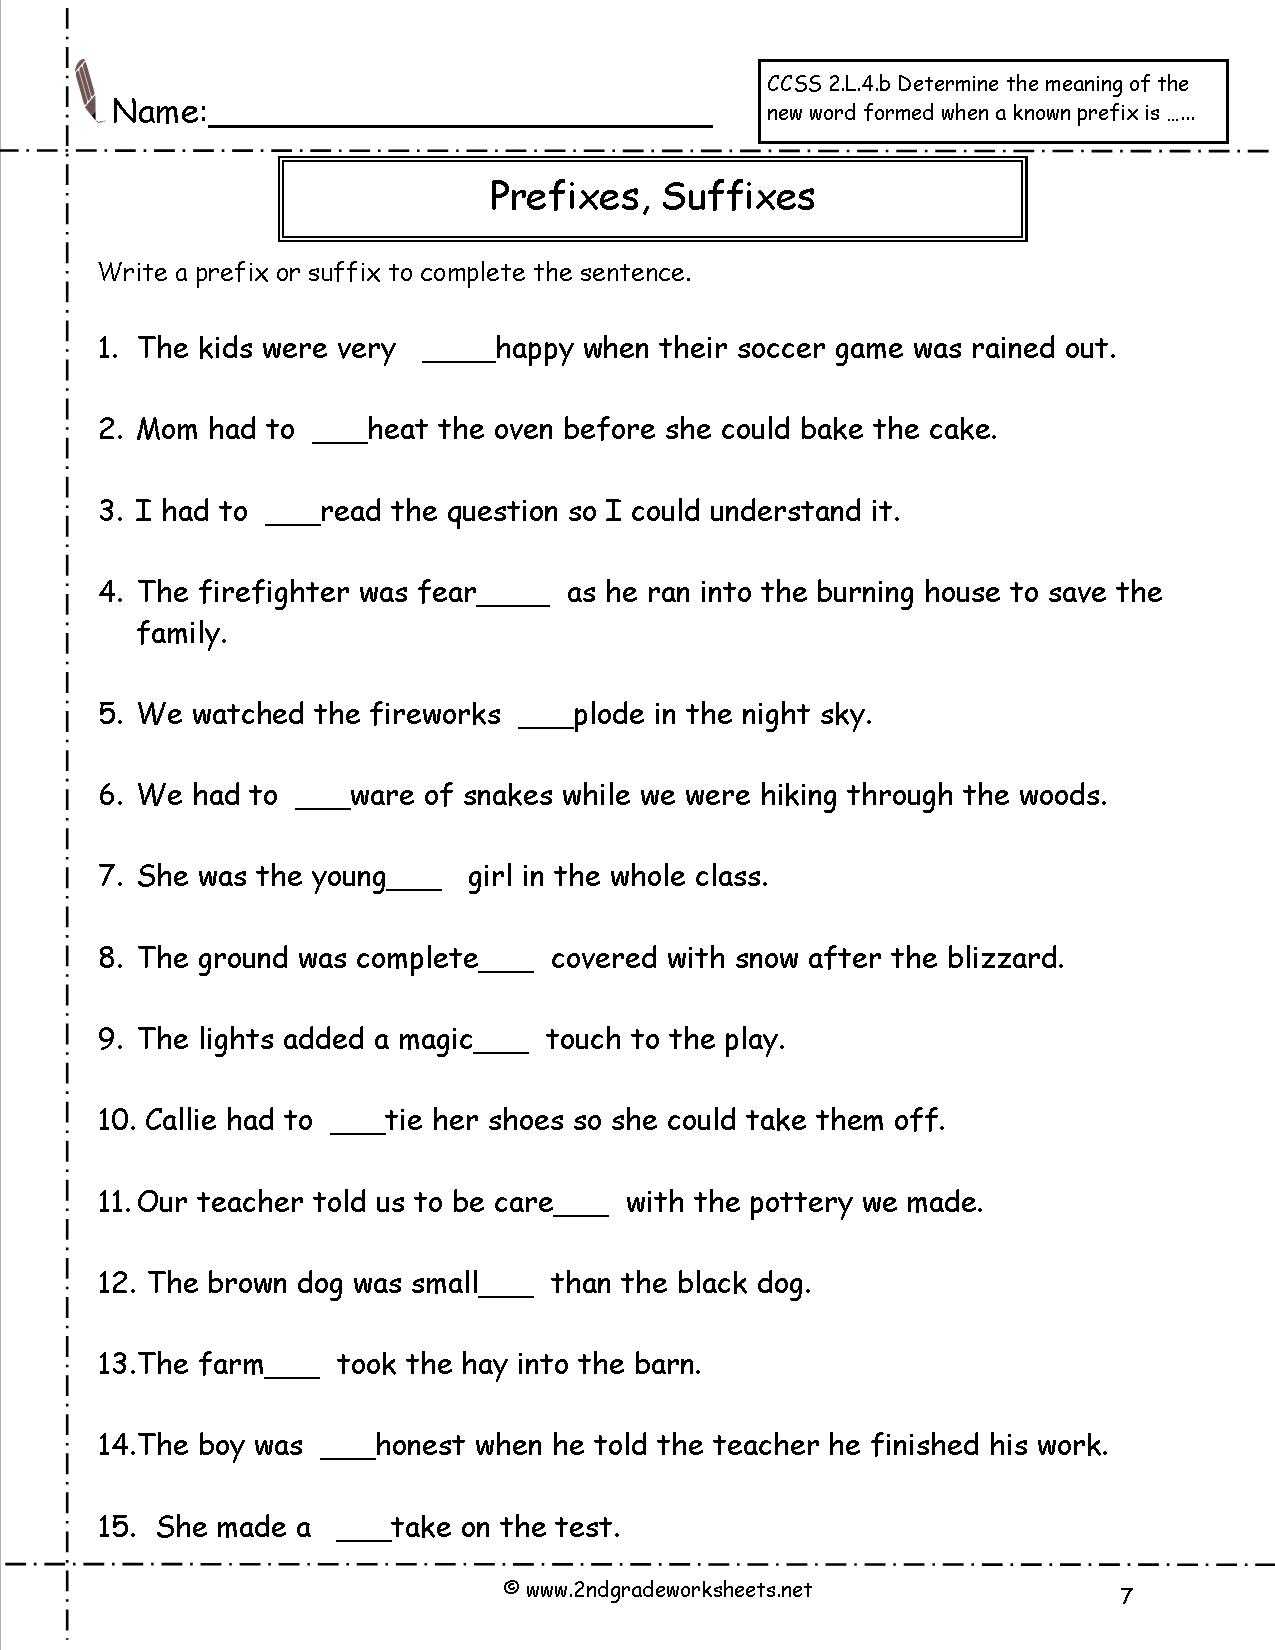 Translation Rotation Reflection Worksheet Answers Also Prefix Worksheets 4th Grade the Best Worksheets Image Collection